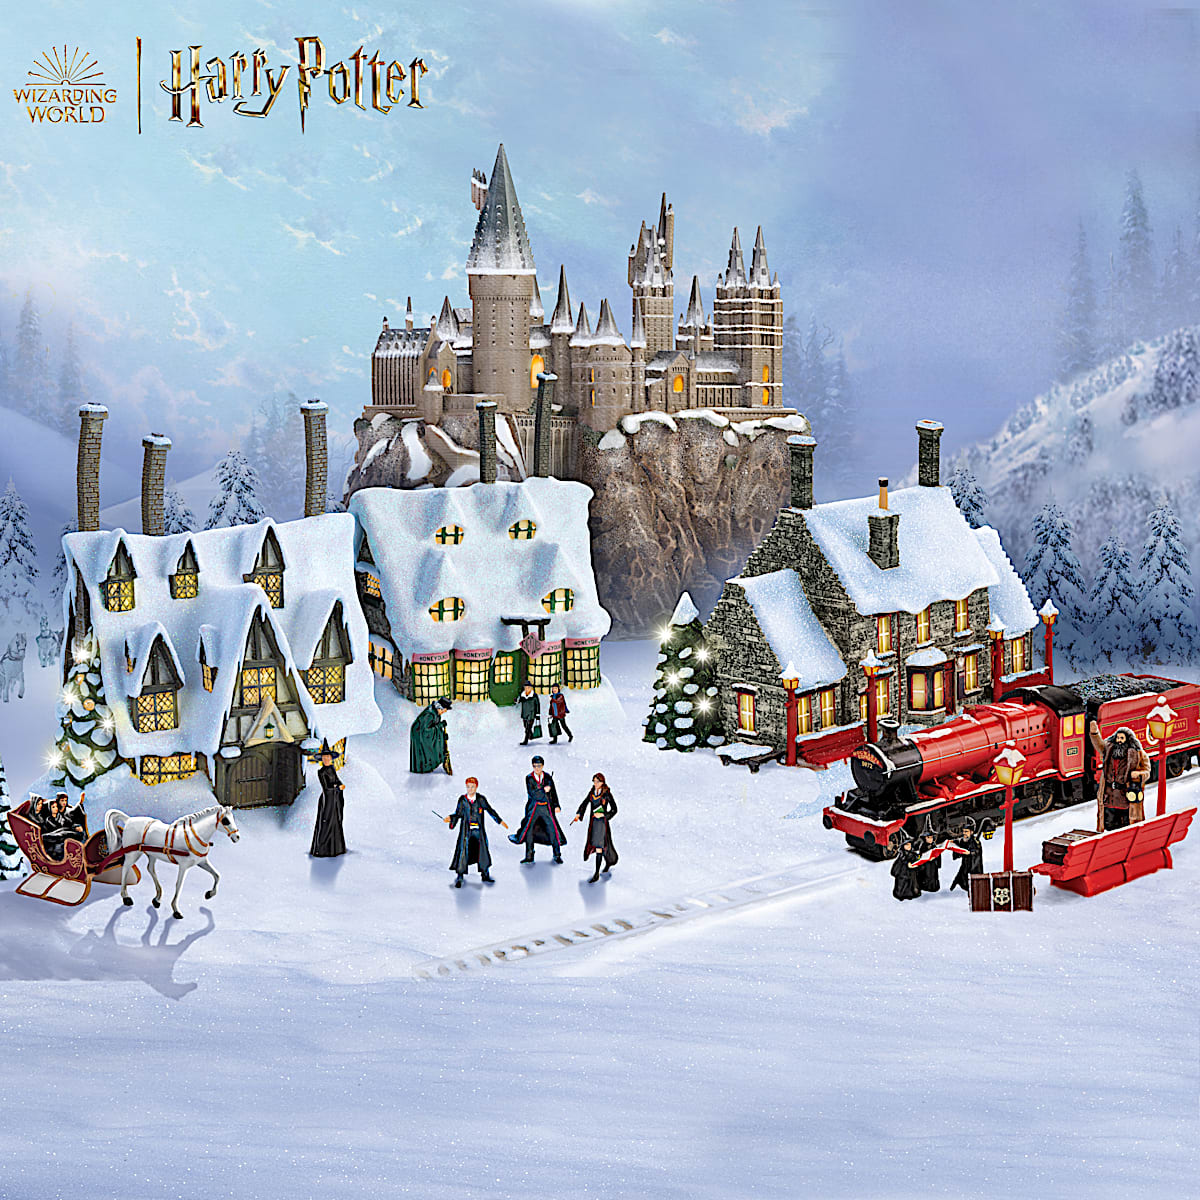 Harry Potter and The Headmaster - Harry Potter Village by